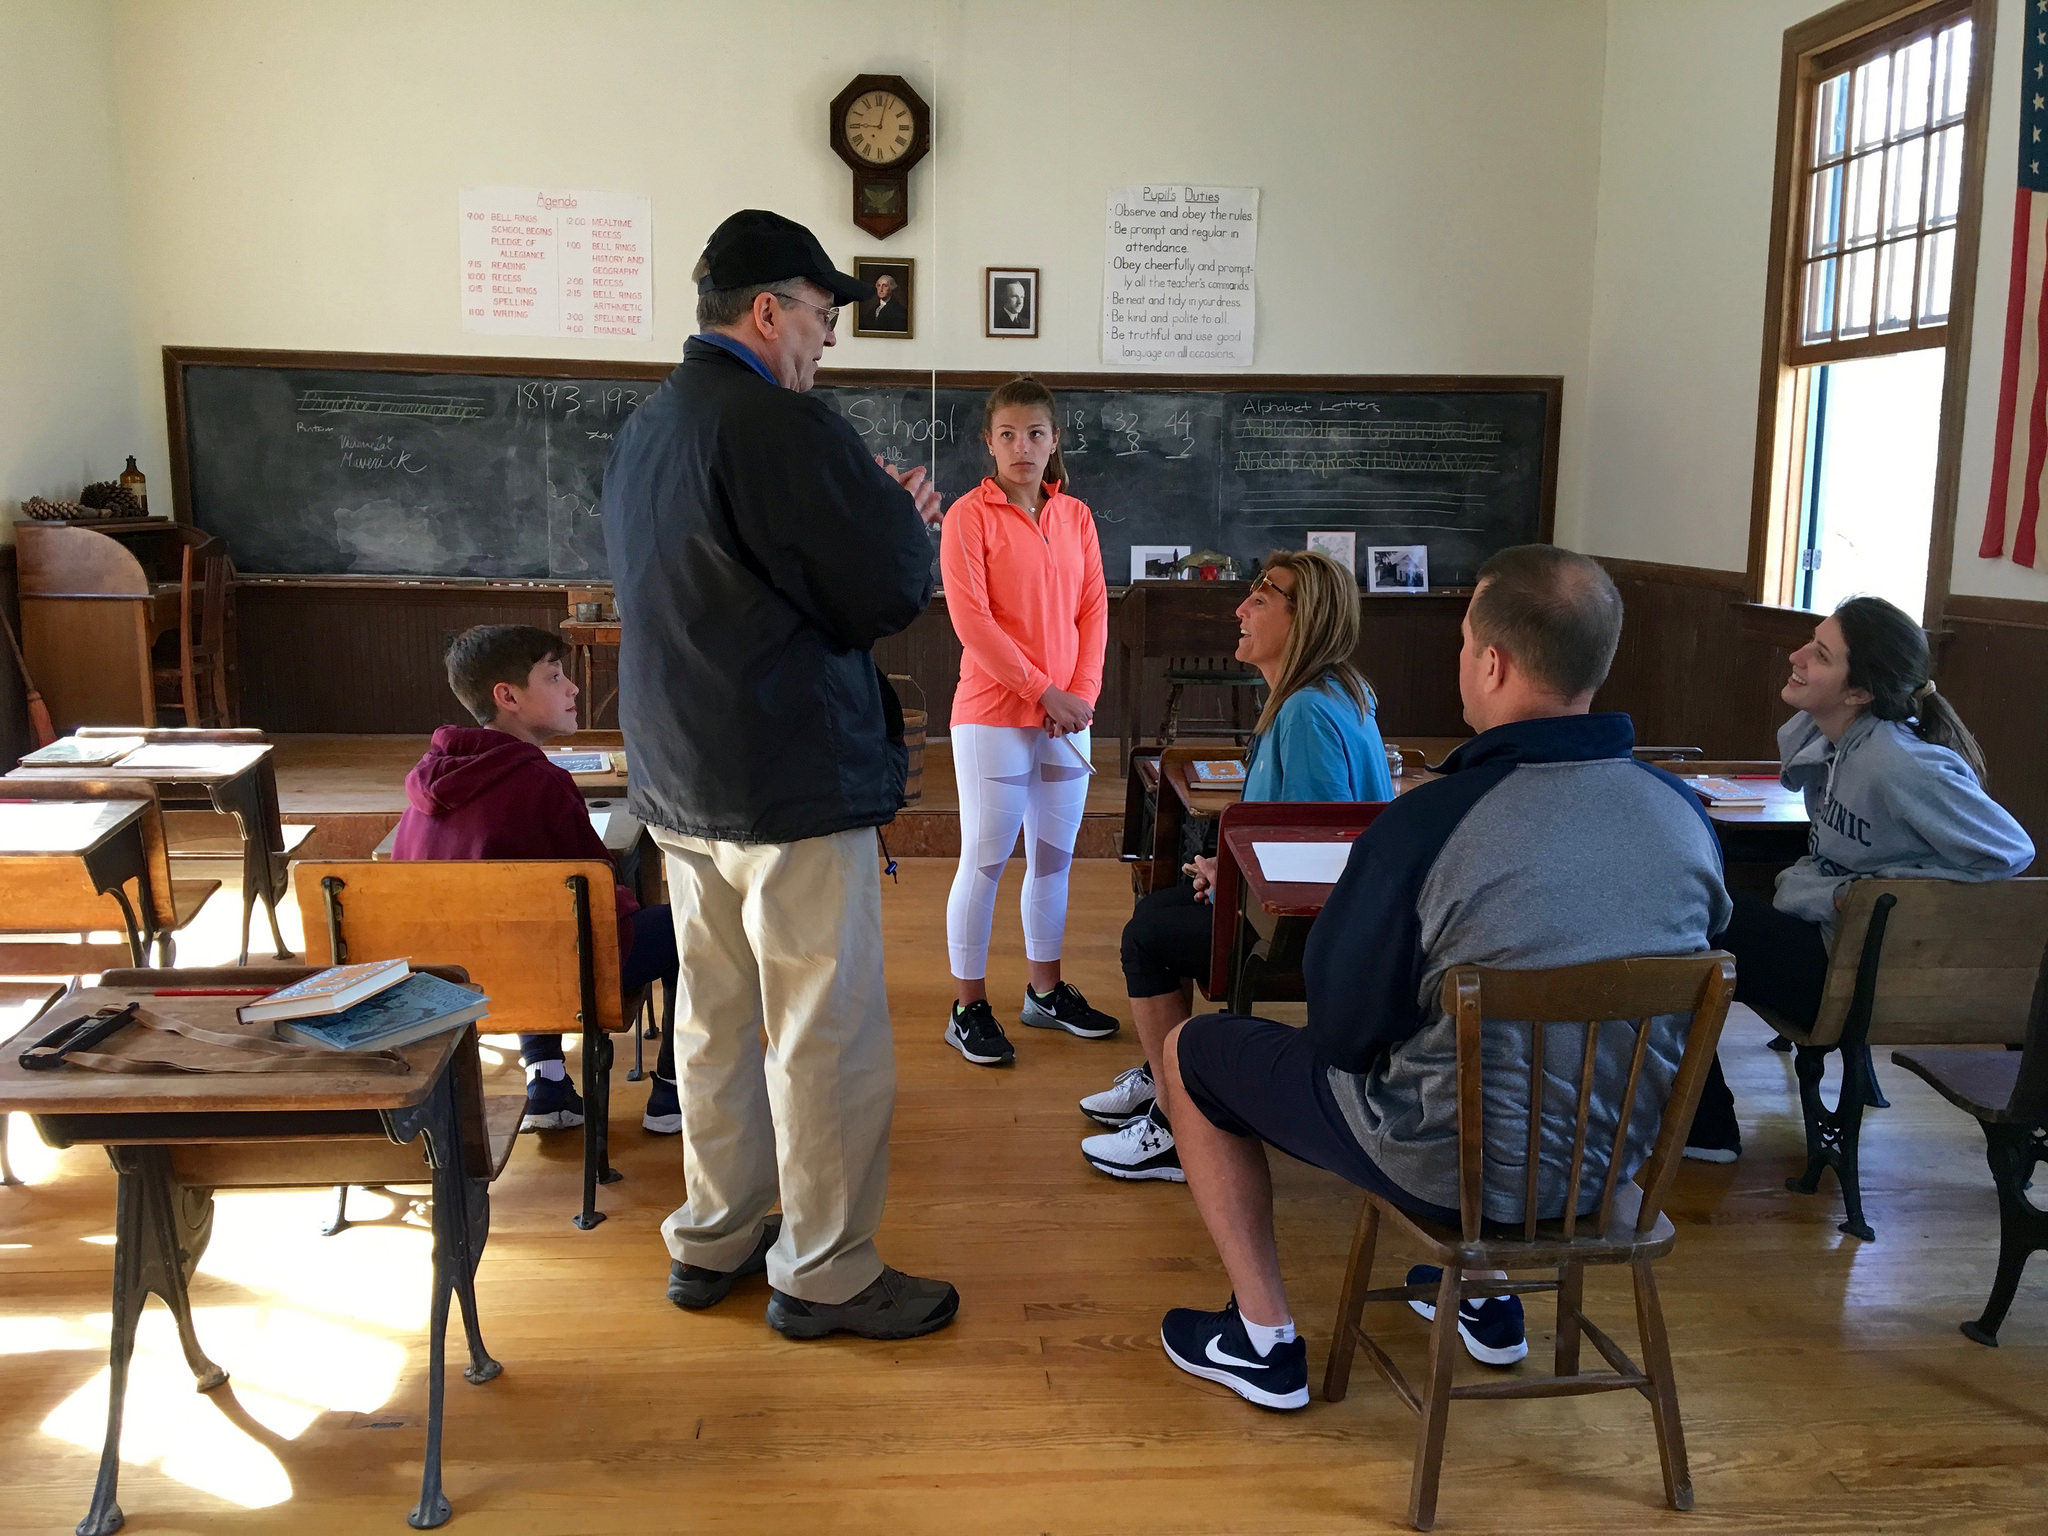 Gallery 1 - At the one-room Kingsley Schoolhouse in Clarksburg, refurbished to look as it did when it closed in 1935, volunteers host free monthly tours on the first Sunday afternoon of the month.